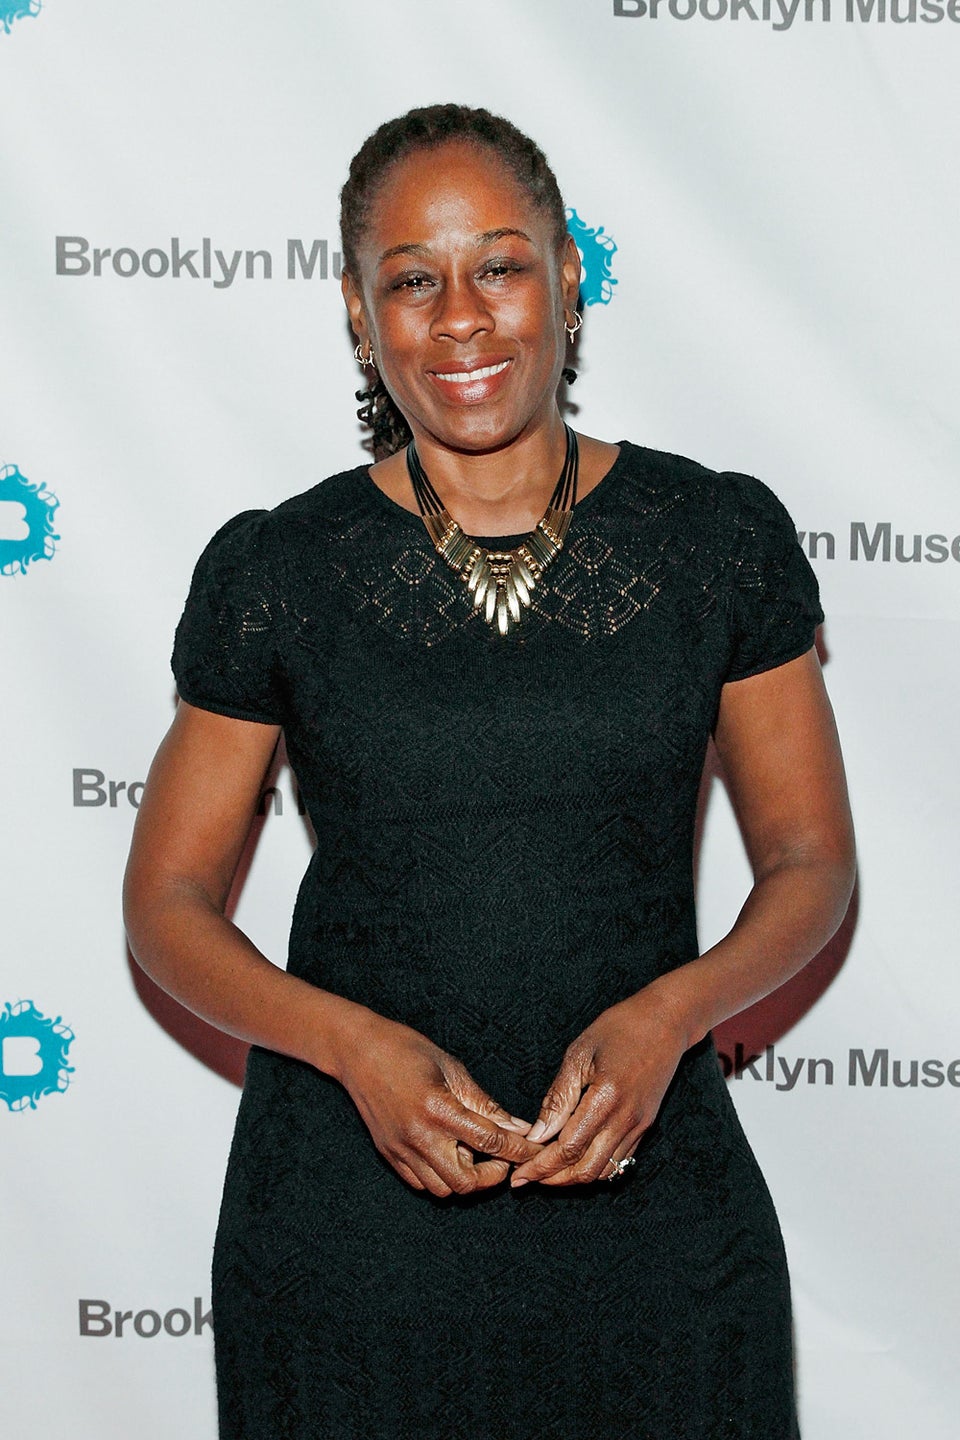 Chirlane McCray, The First Lady of NYC, , Wrote an Ode to Tampons